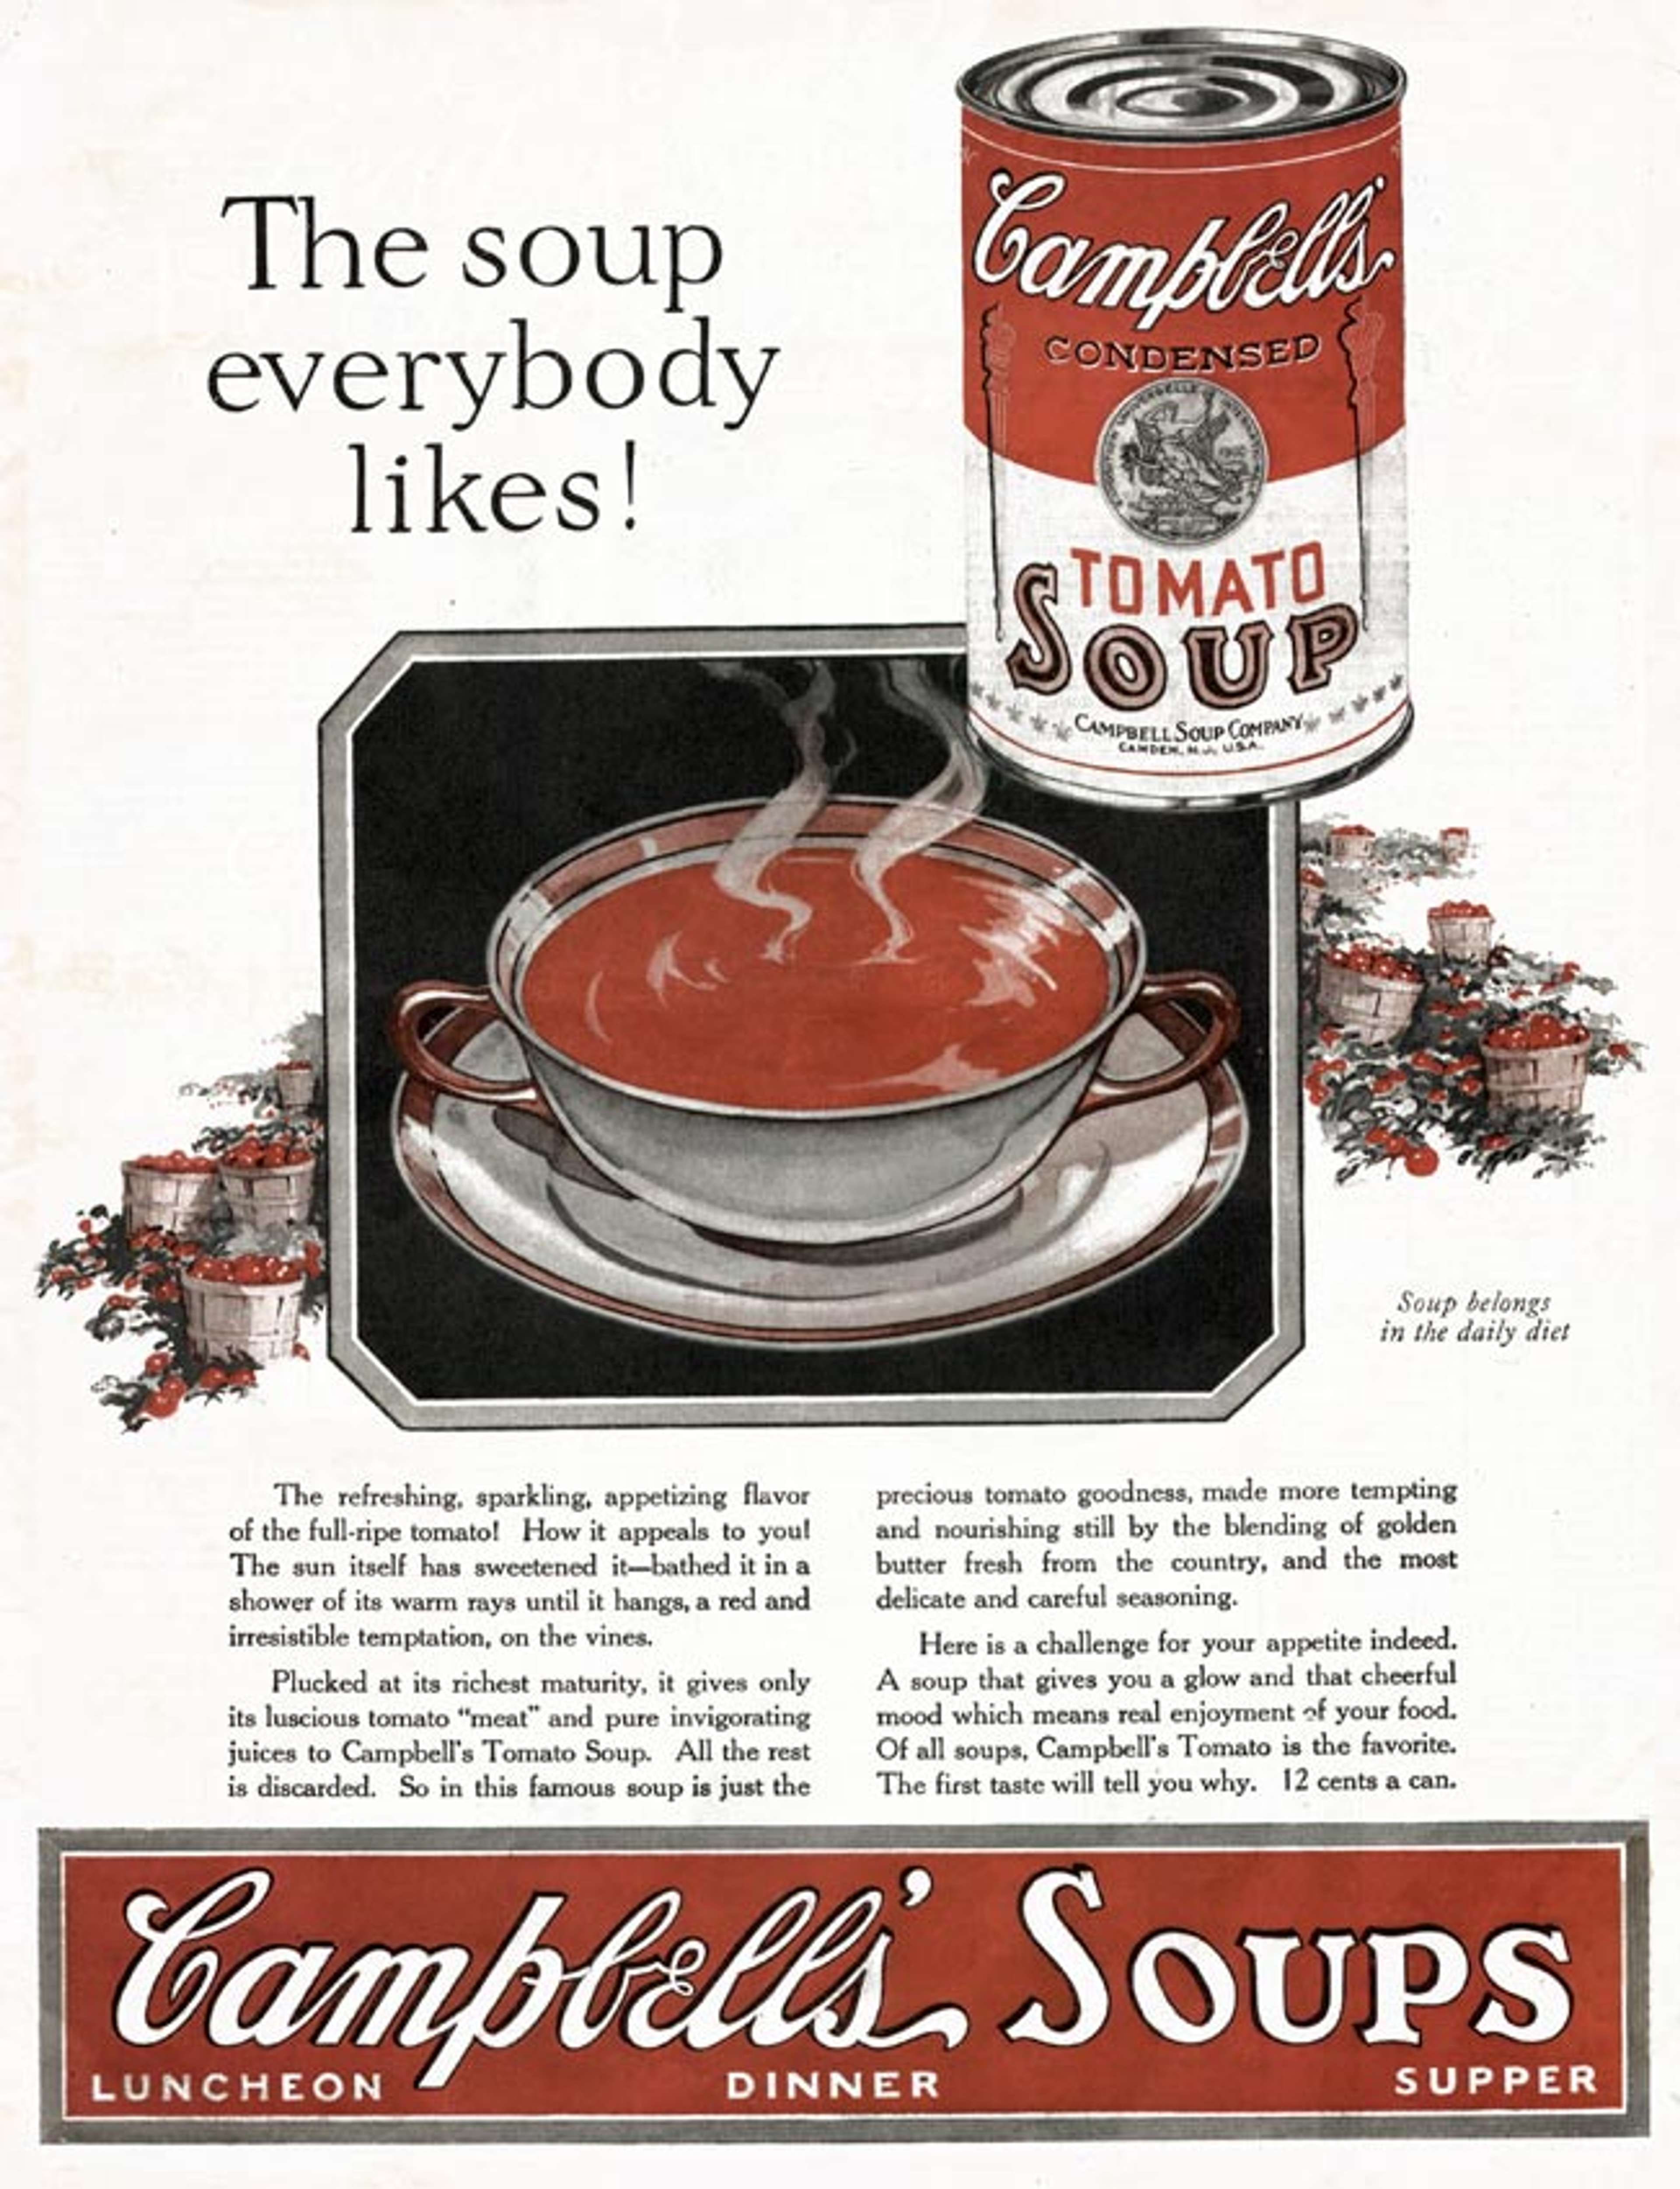 Ad for Campbell's Tomato Soup, published in the June 1927 issue of the People's Home Journal.